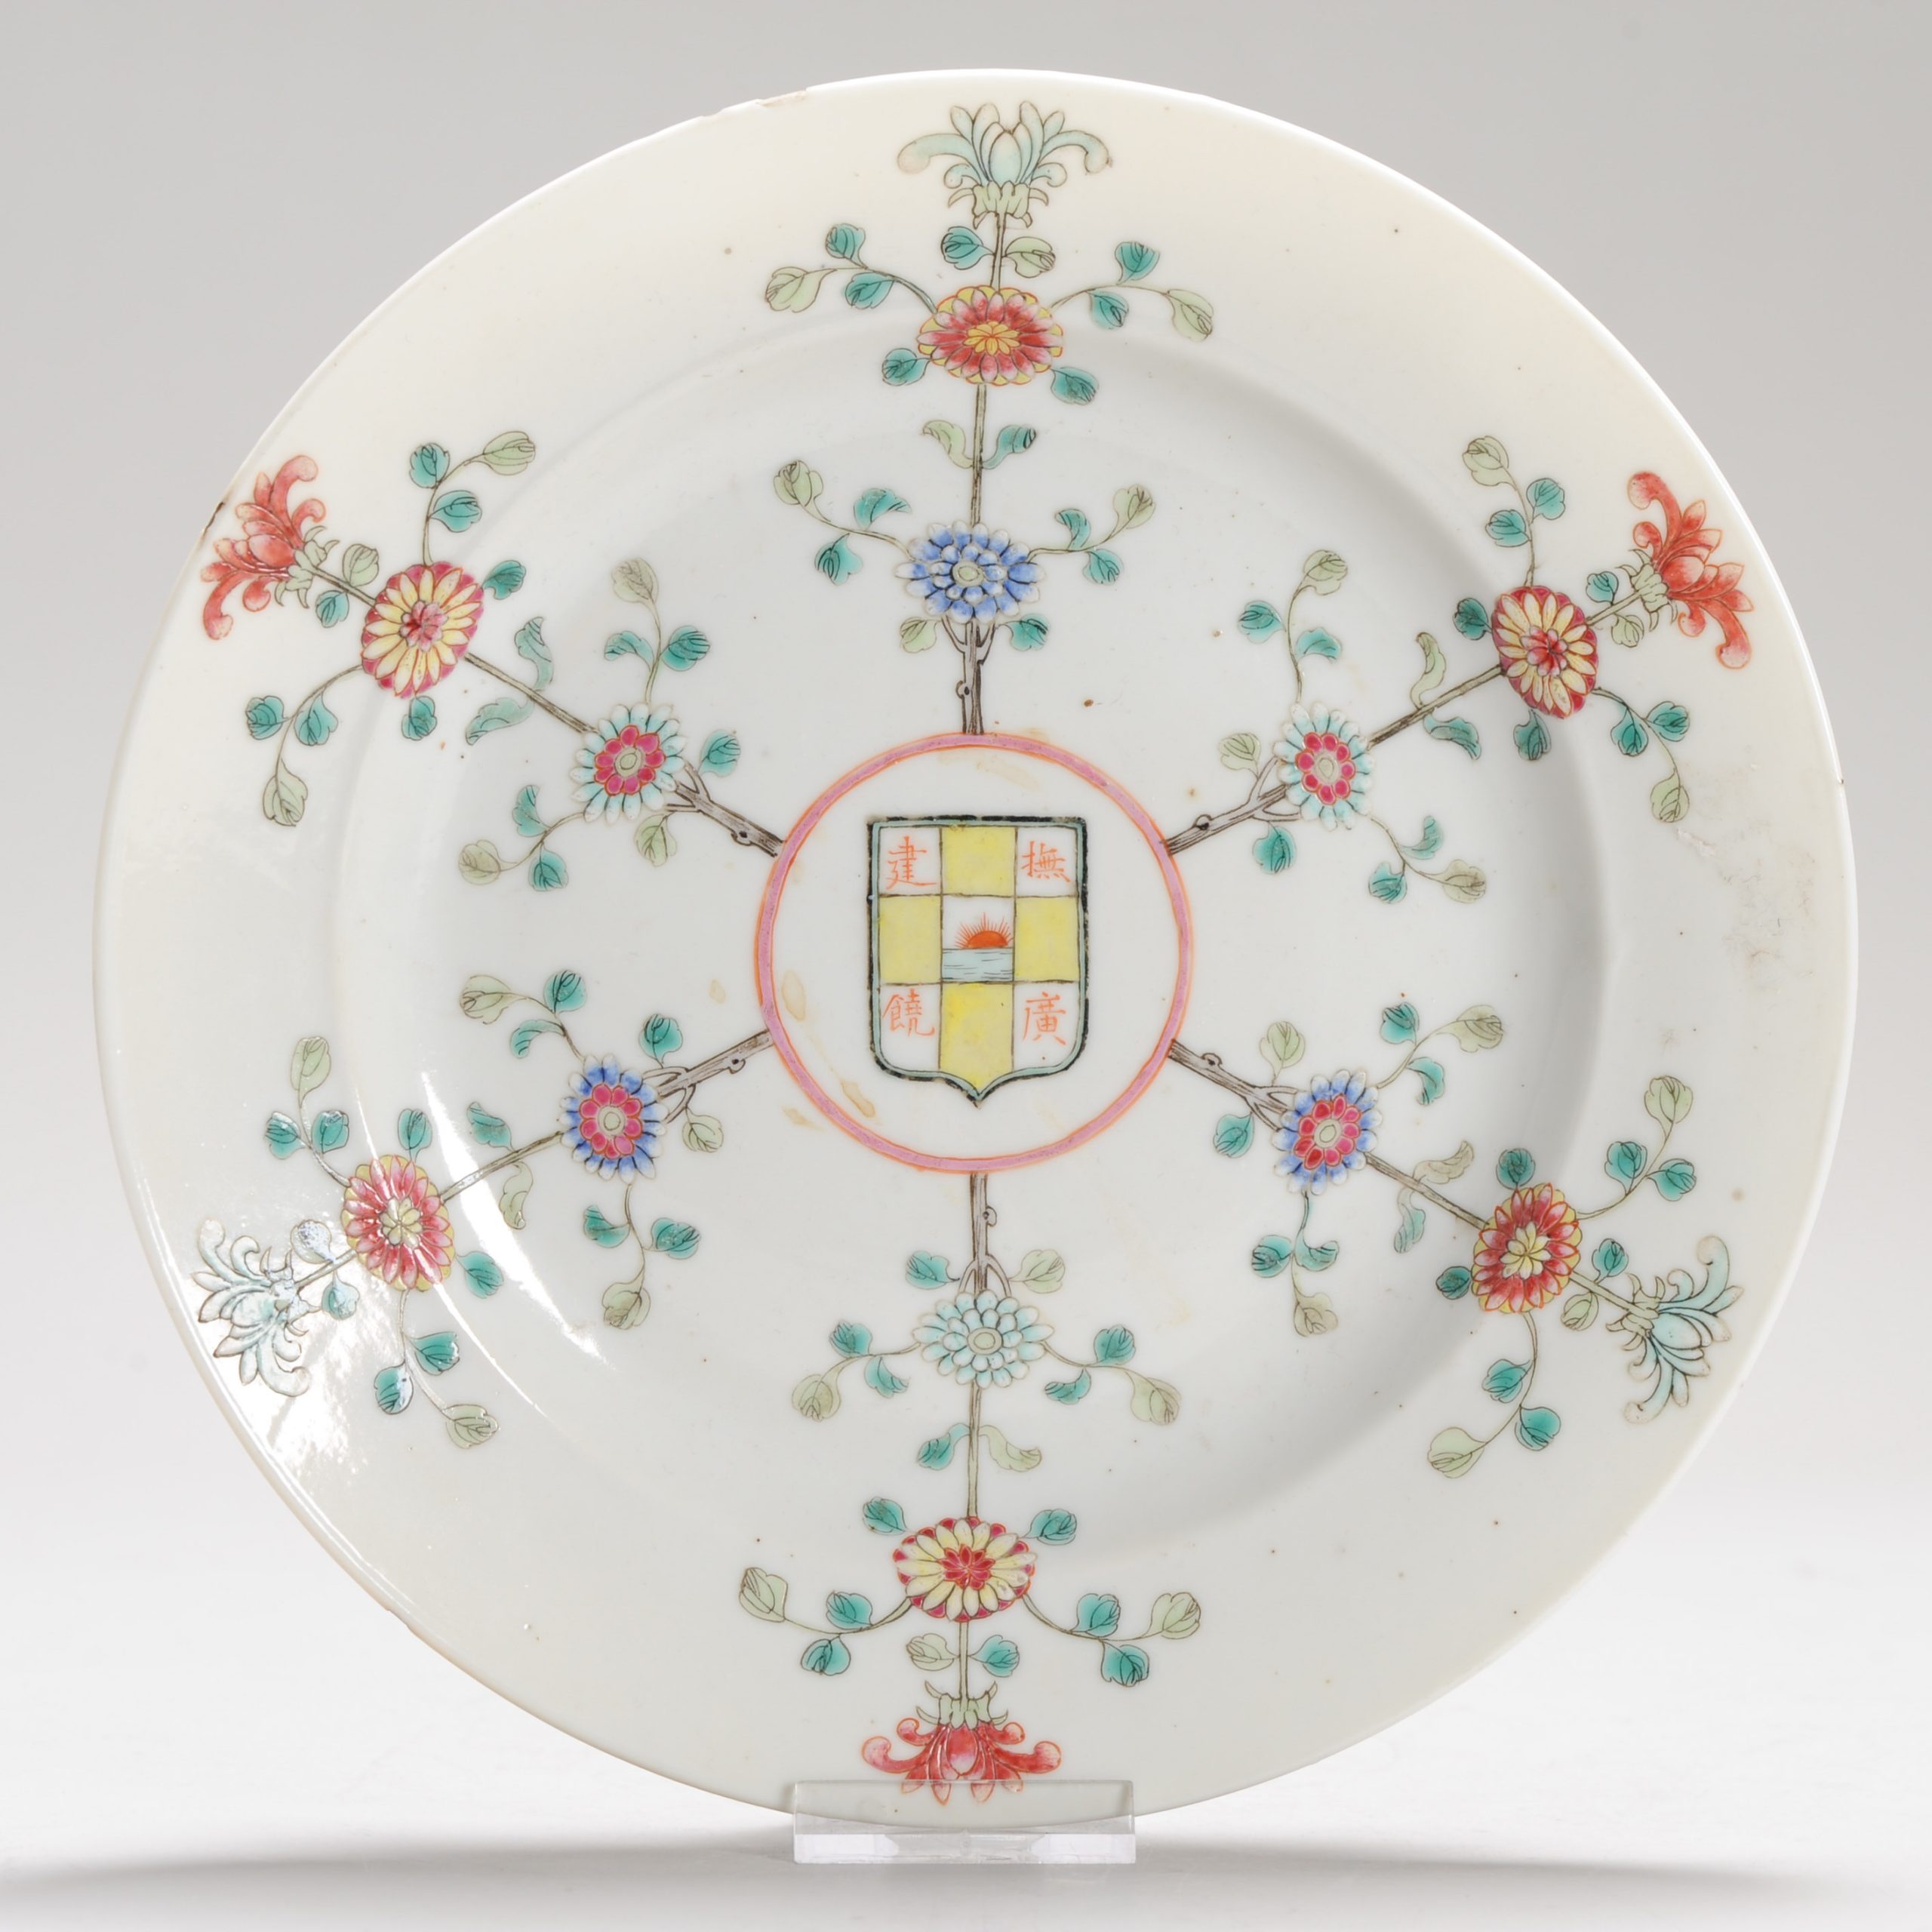 1254 Lovely circa 1900 Late Qing period dish, marked at the base. Very rare decoration